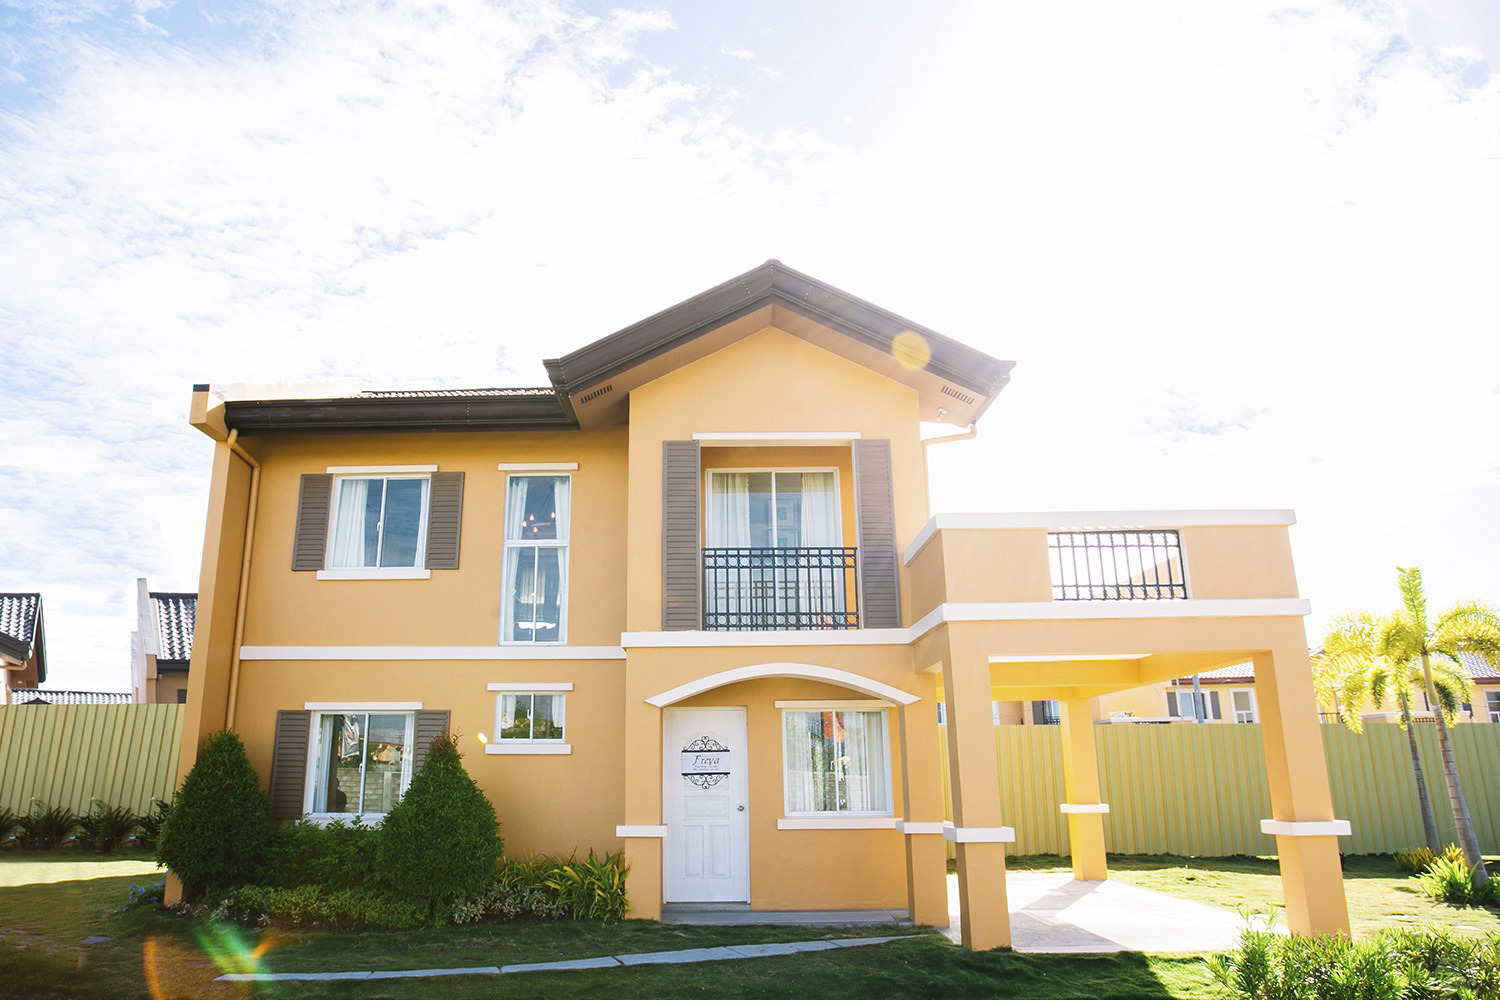 AFFORDABLE HOUSE AND LOT IN GAPAN – FREYA UNIT